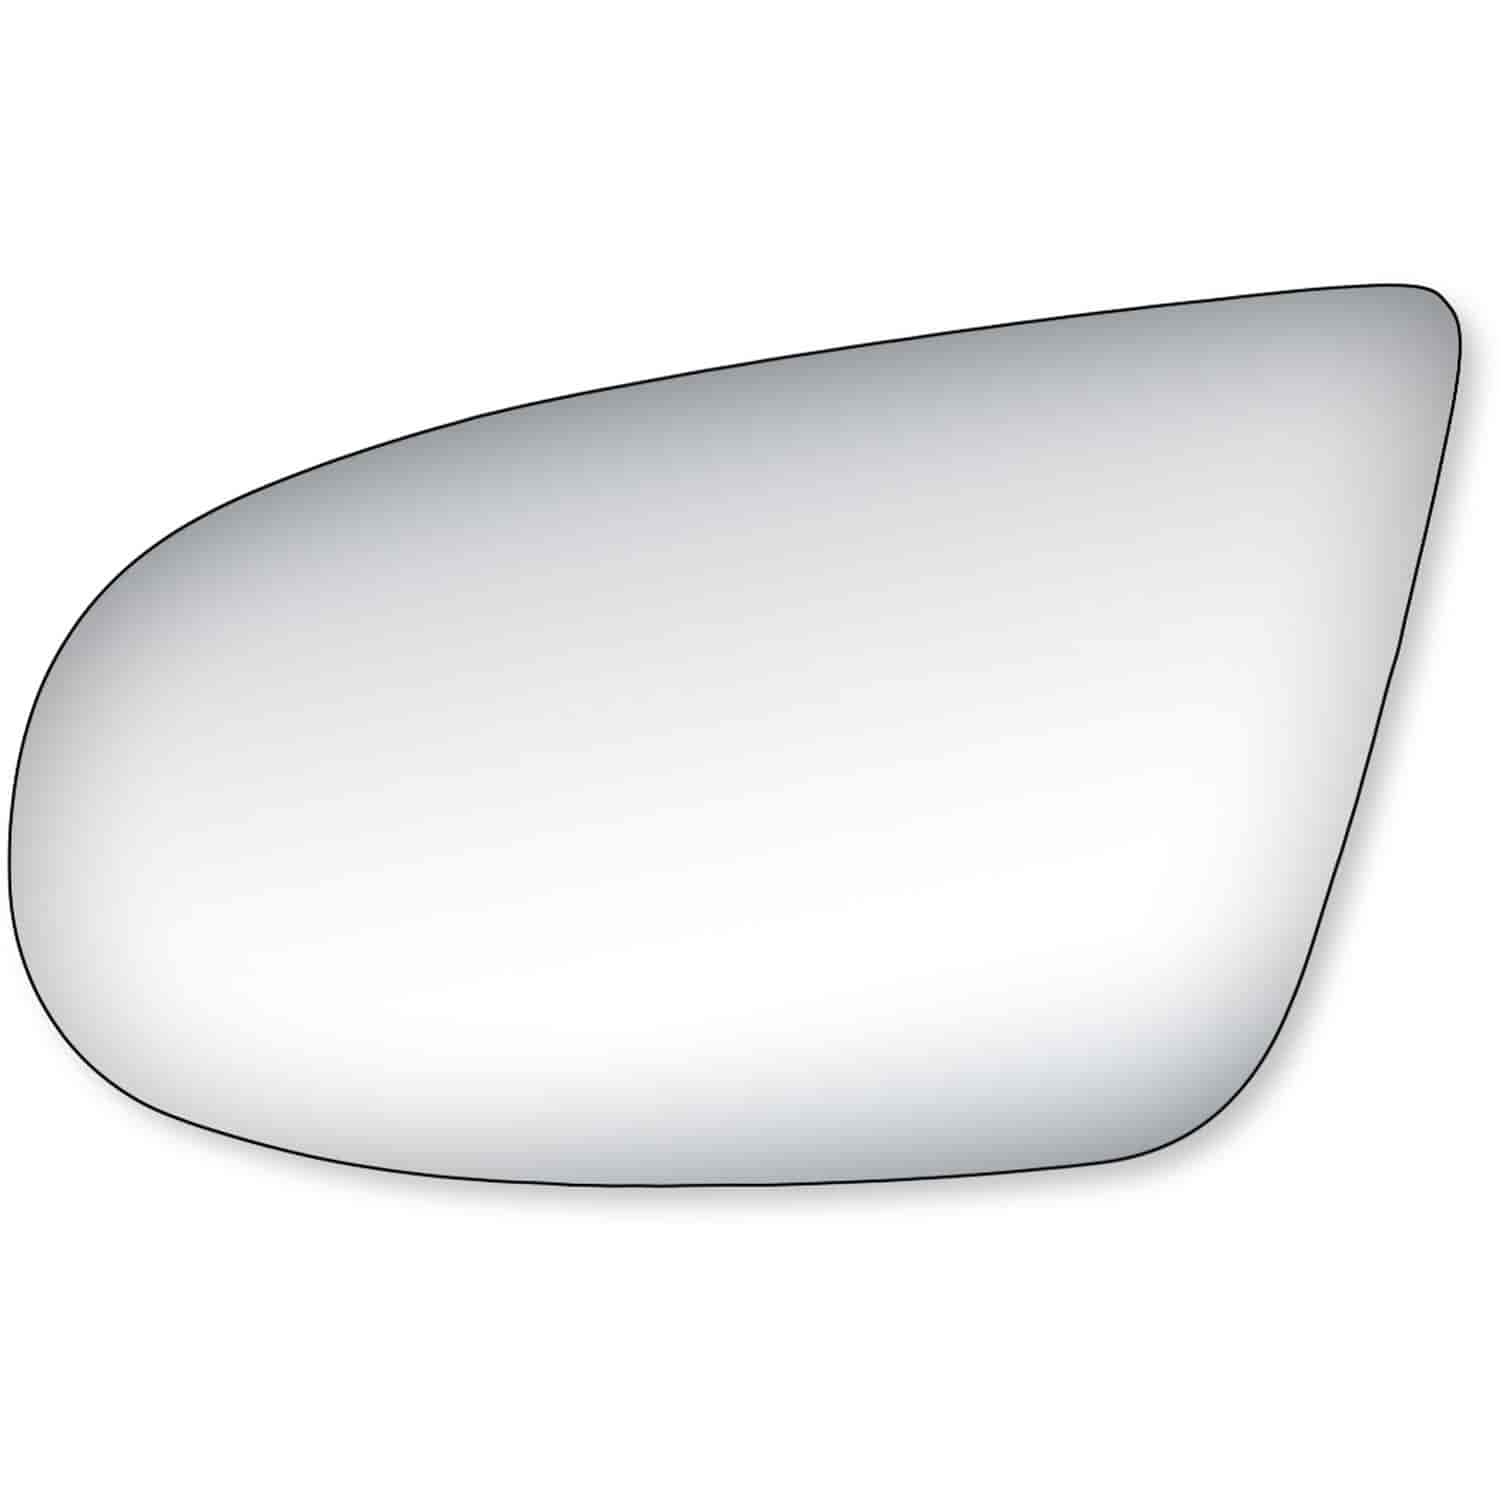 Replacement Glass for 95-99 Lumina; 95-99 Monte Carlo the glass measures 3 7/16 tall by 5 13/16 wide